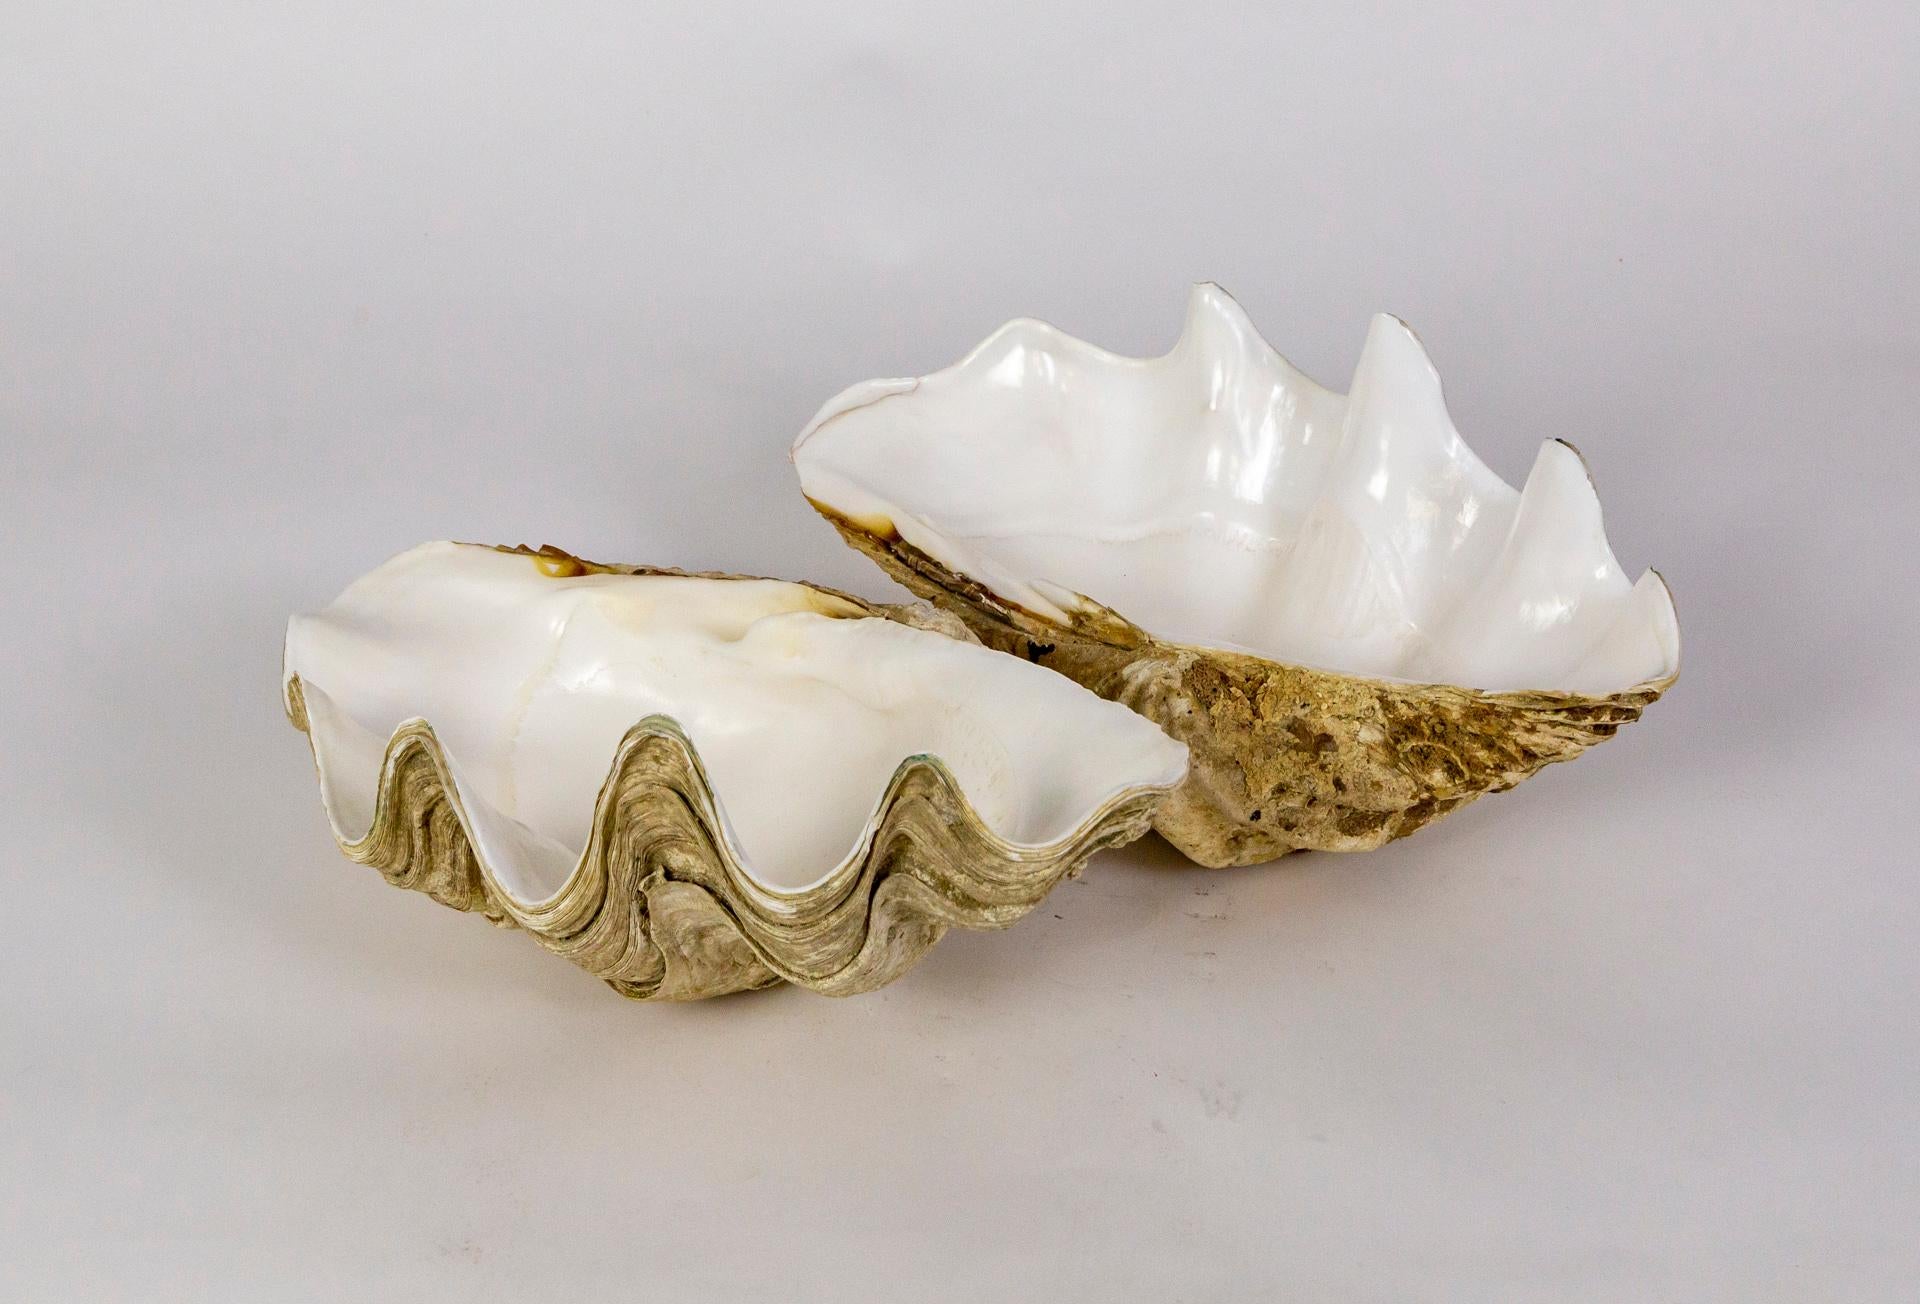 Tridacna (giant clam) is a genus of large, saltwater clams, with striated shells with 4-6 fluted folds. This complete shell sits beautifully at an angle, as though it's floating. It has encrustations of shells, coral, sponge, and barnacles on the